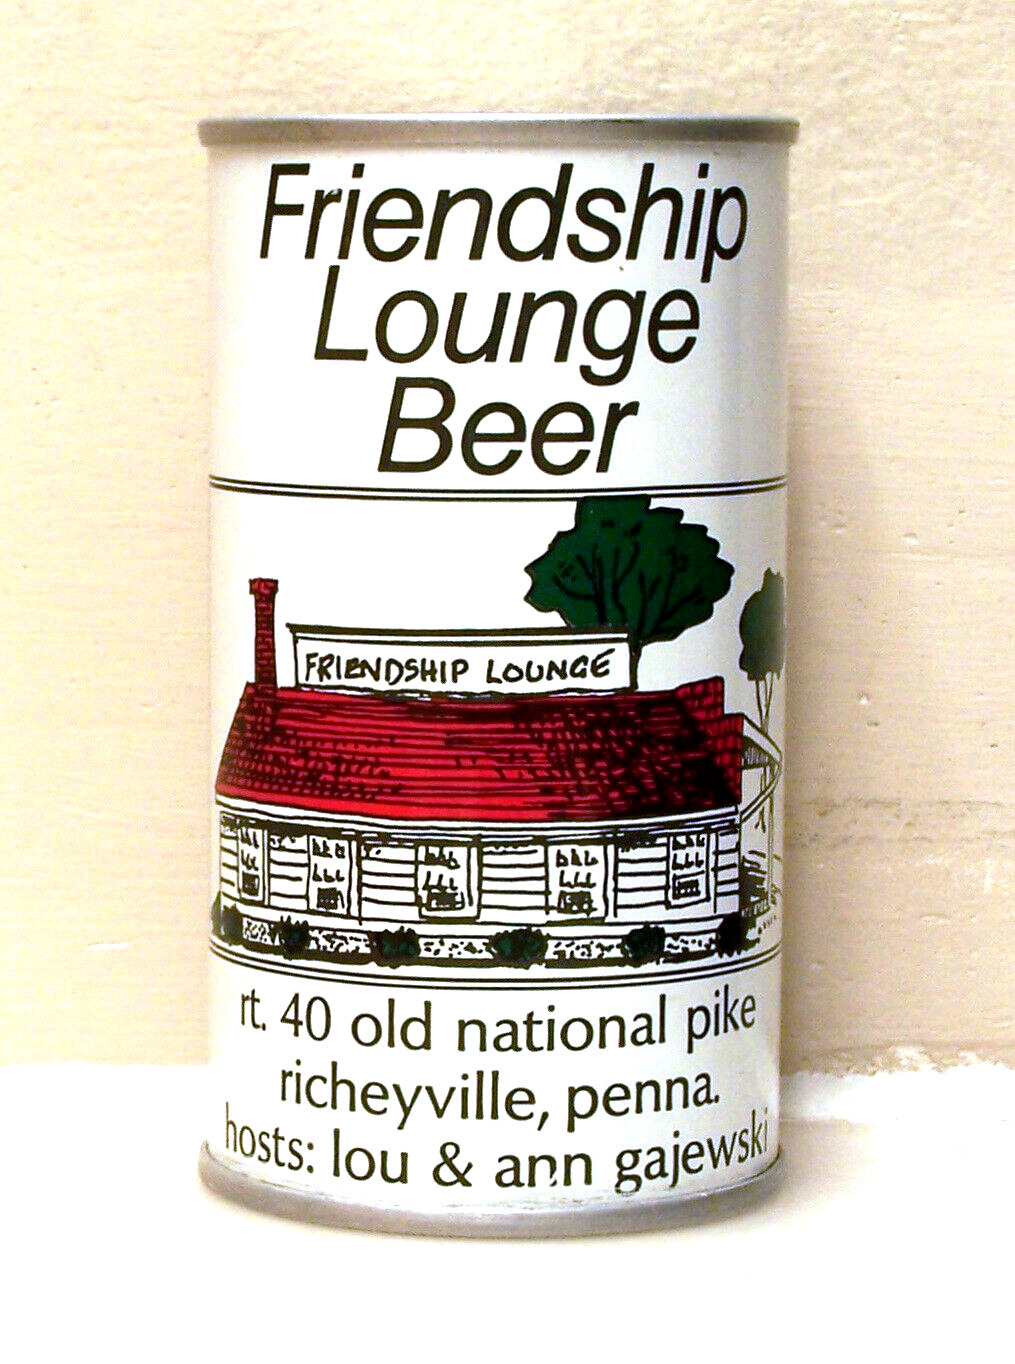 FRIENDSHIP LOUNGE S/S BO beer can